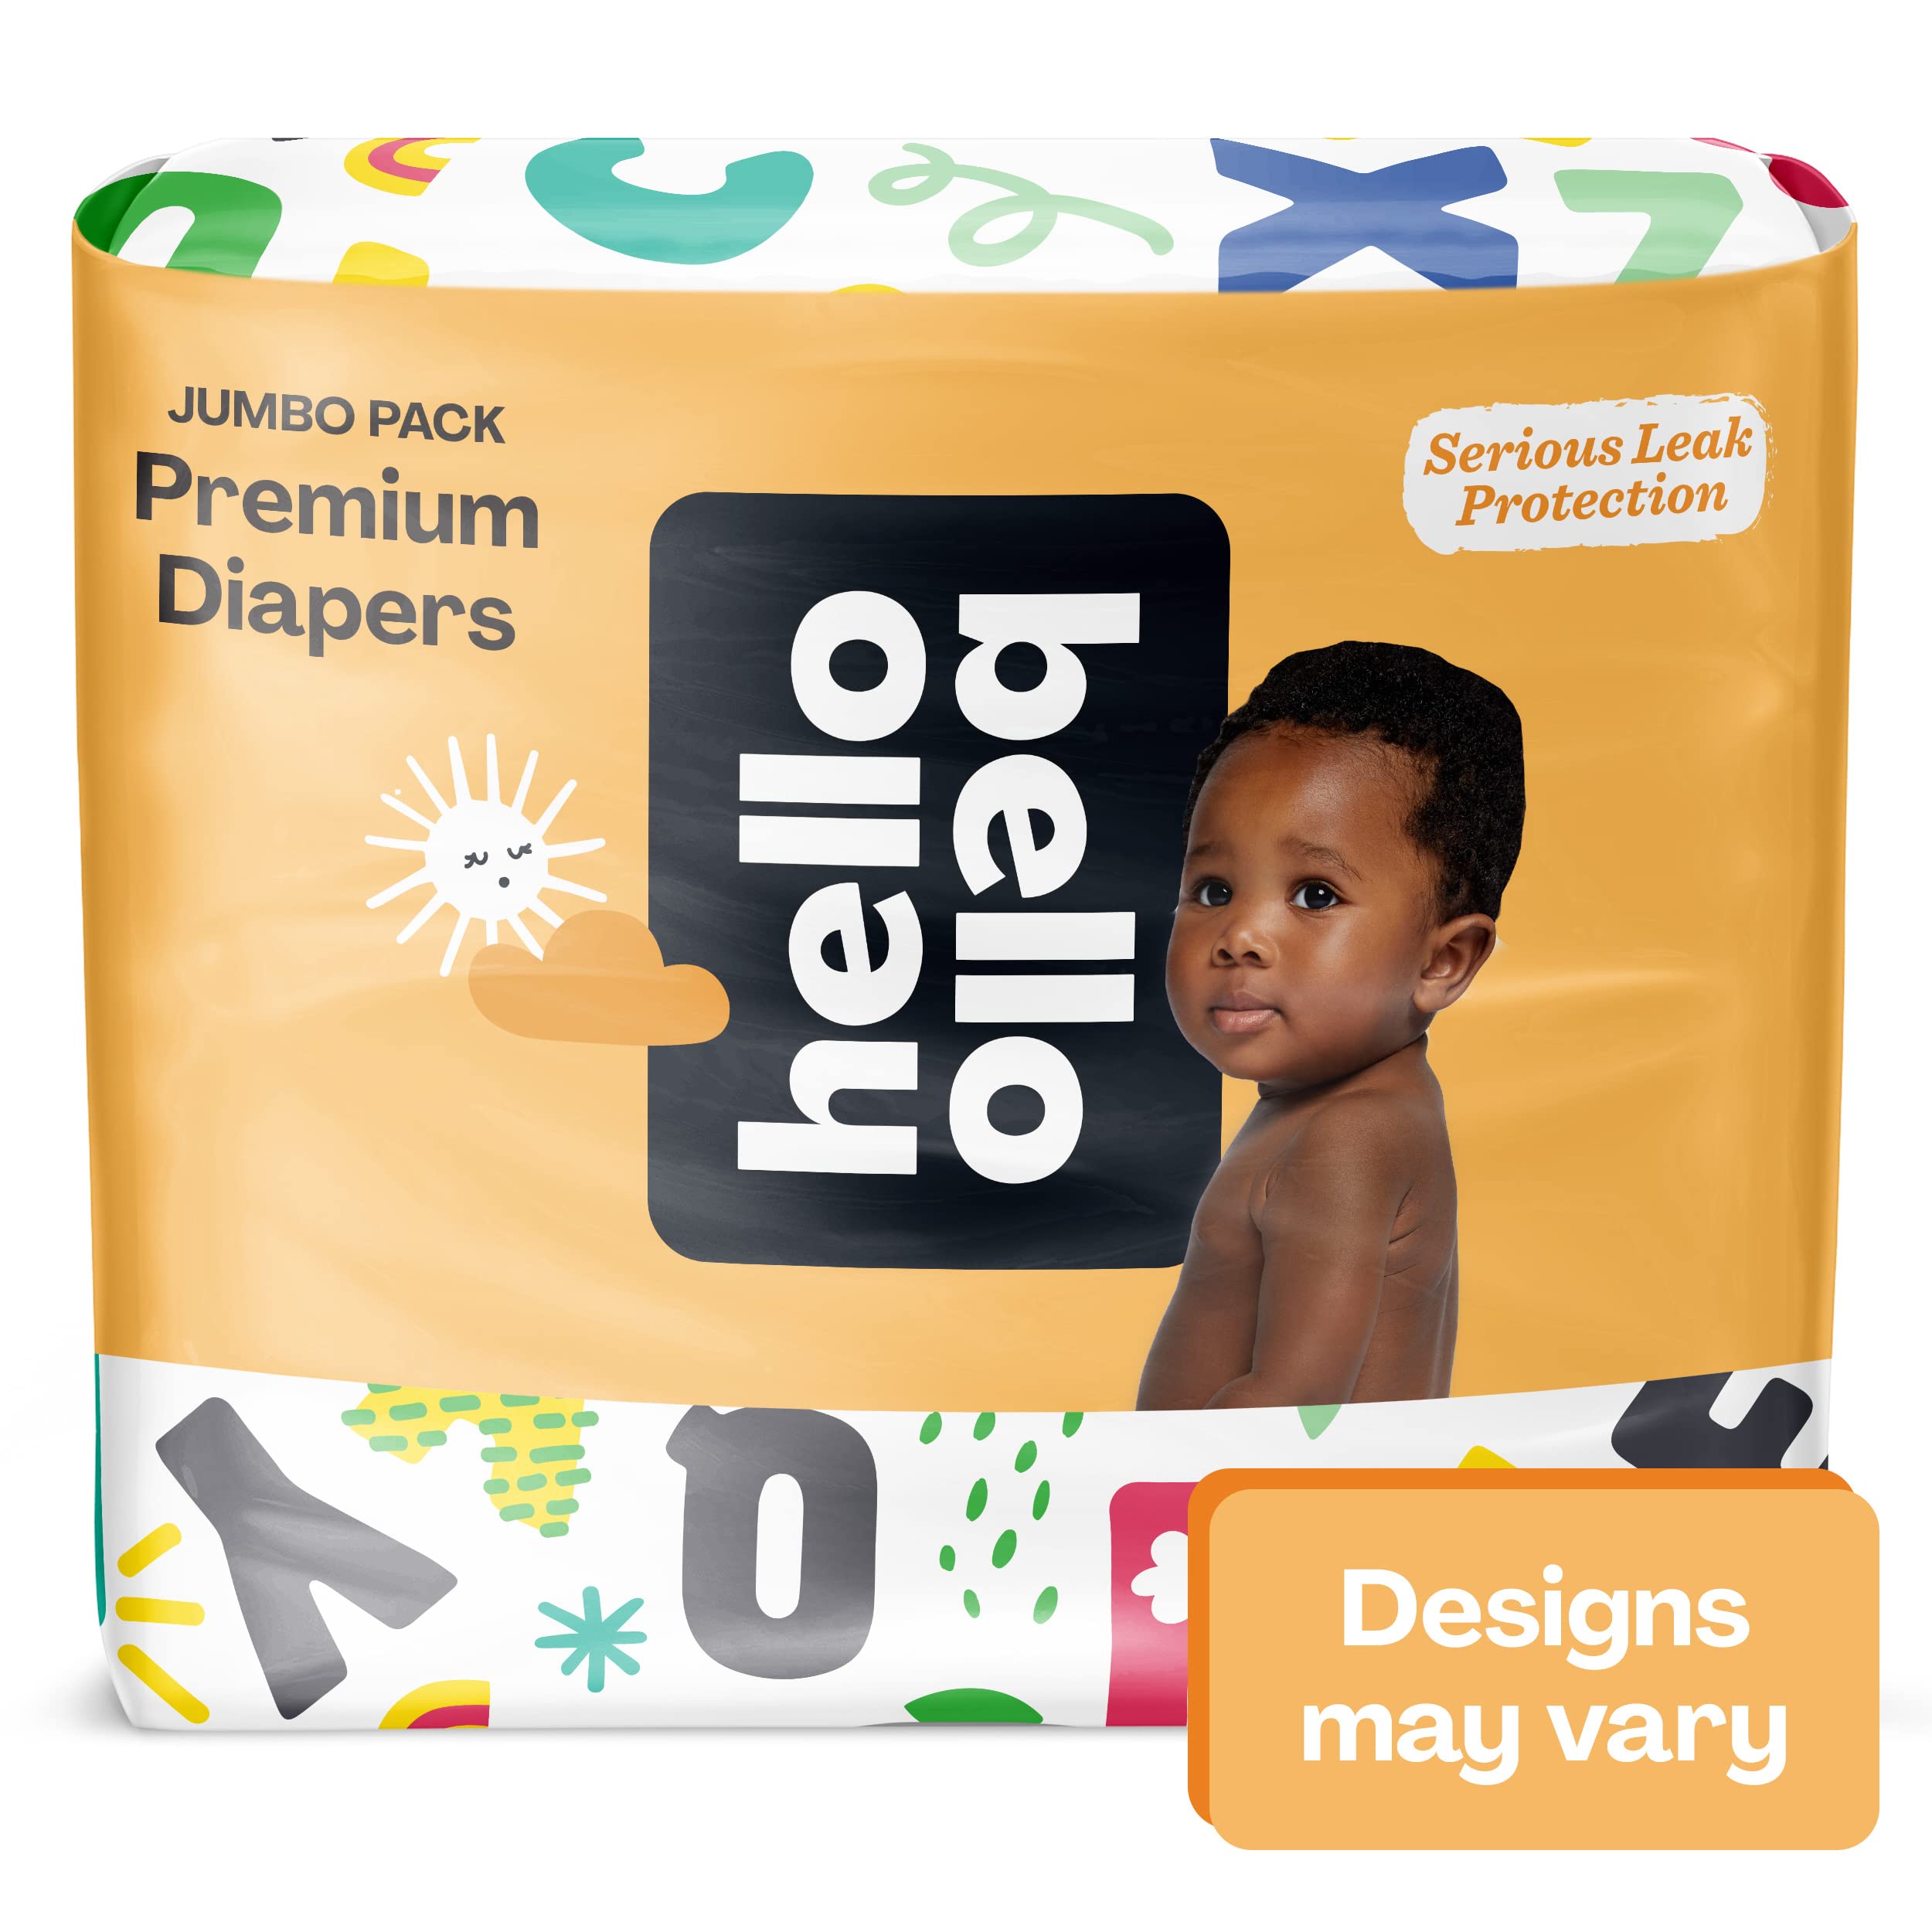 Hello Bello Premium Baby Diapers Size 4 I 84 Count of Disposable, Extra-Absorbent, Hypoallergenic, and Eco-Friendly Baby Diapers with Snug and Comfort Fit I Surprise Boy Patterns